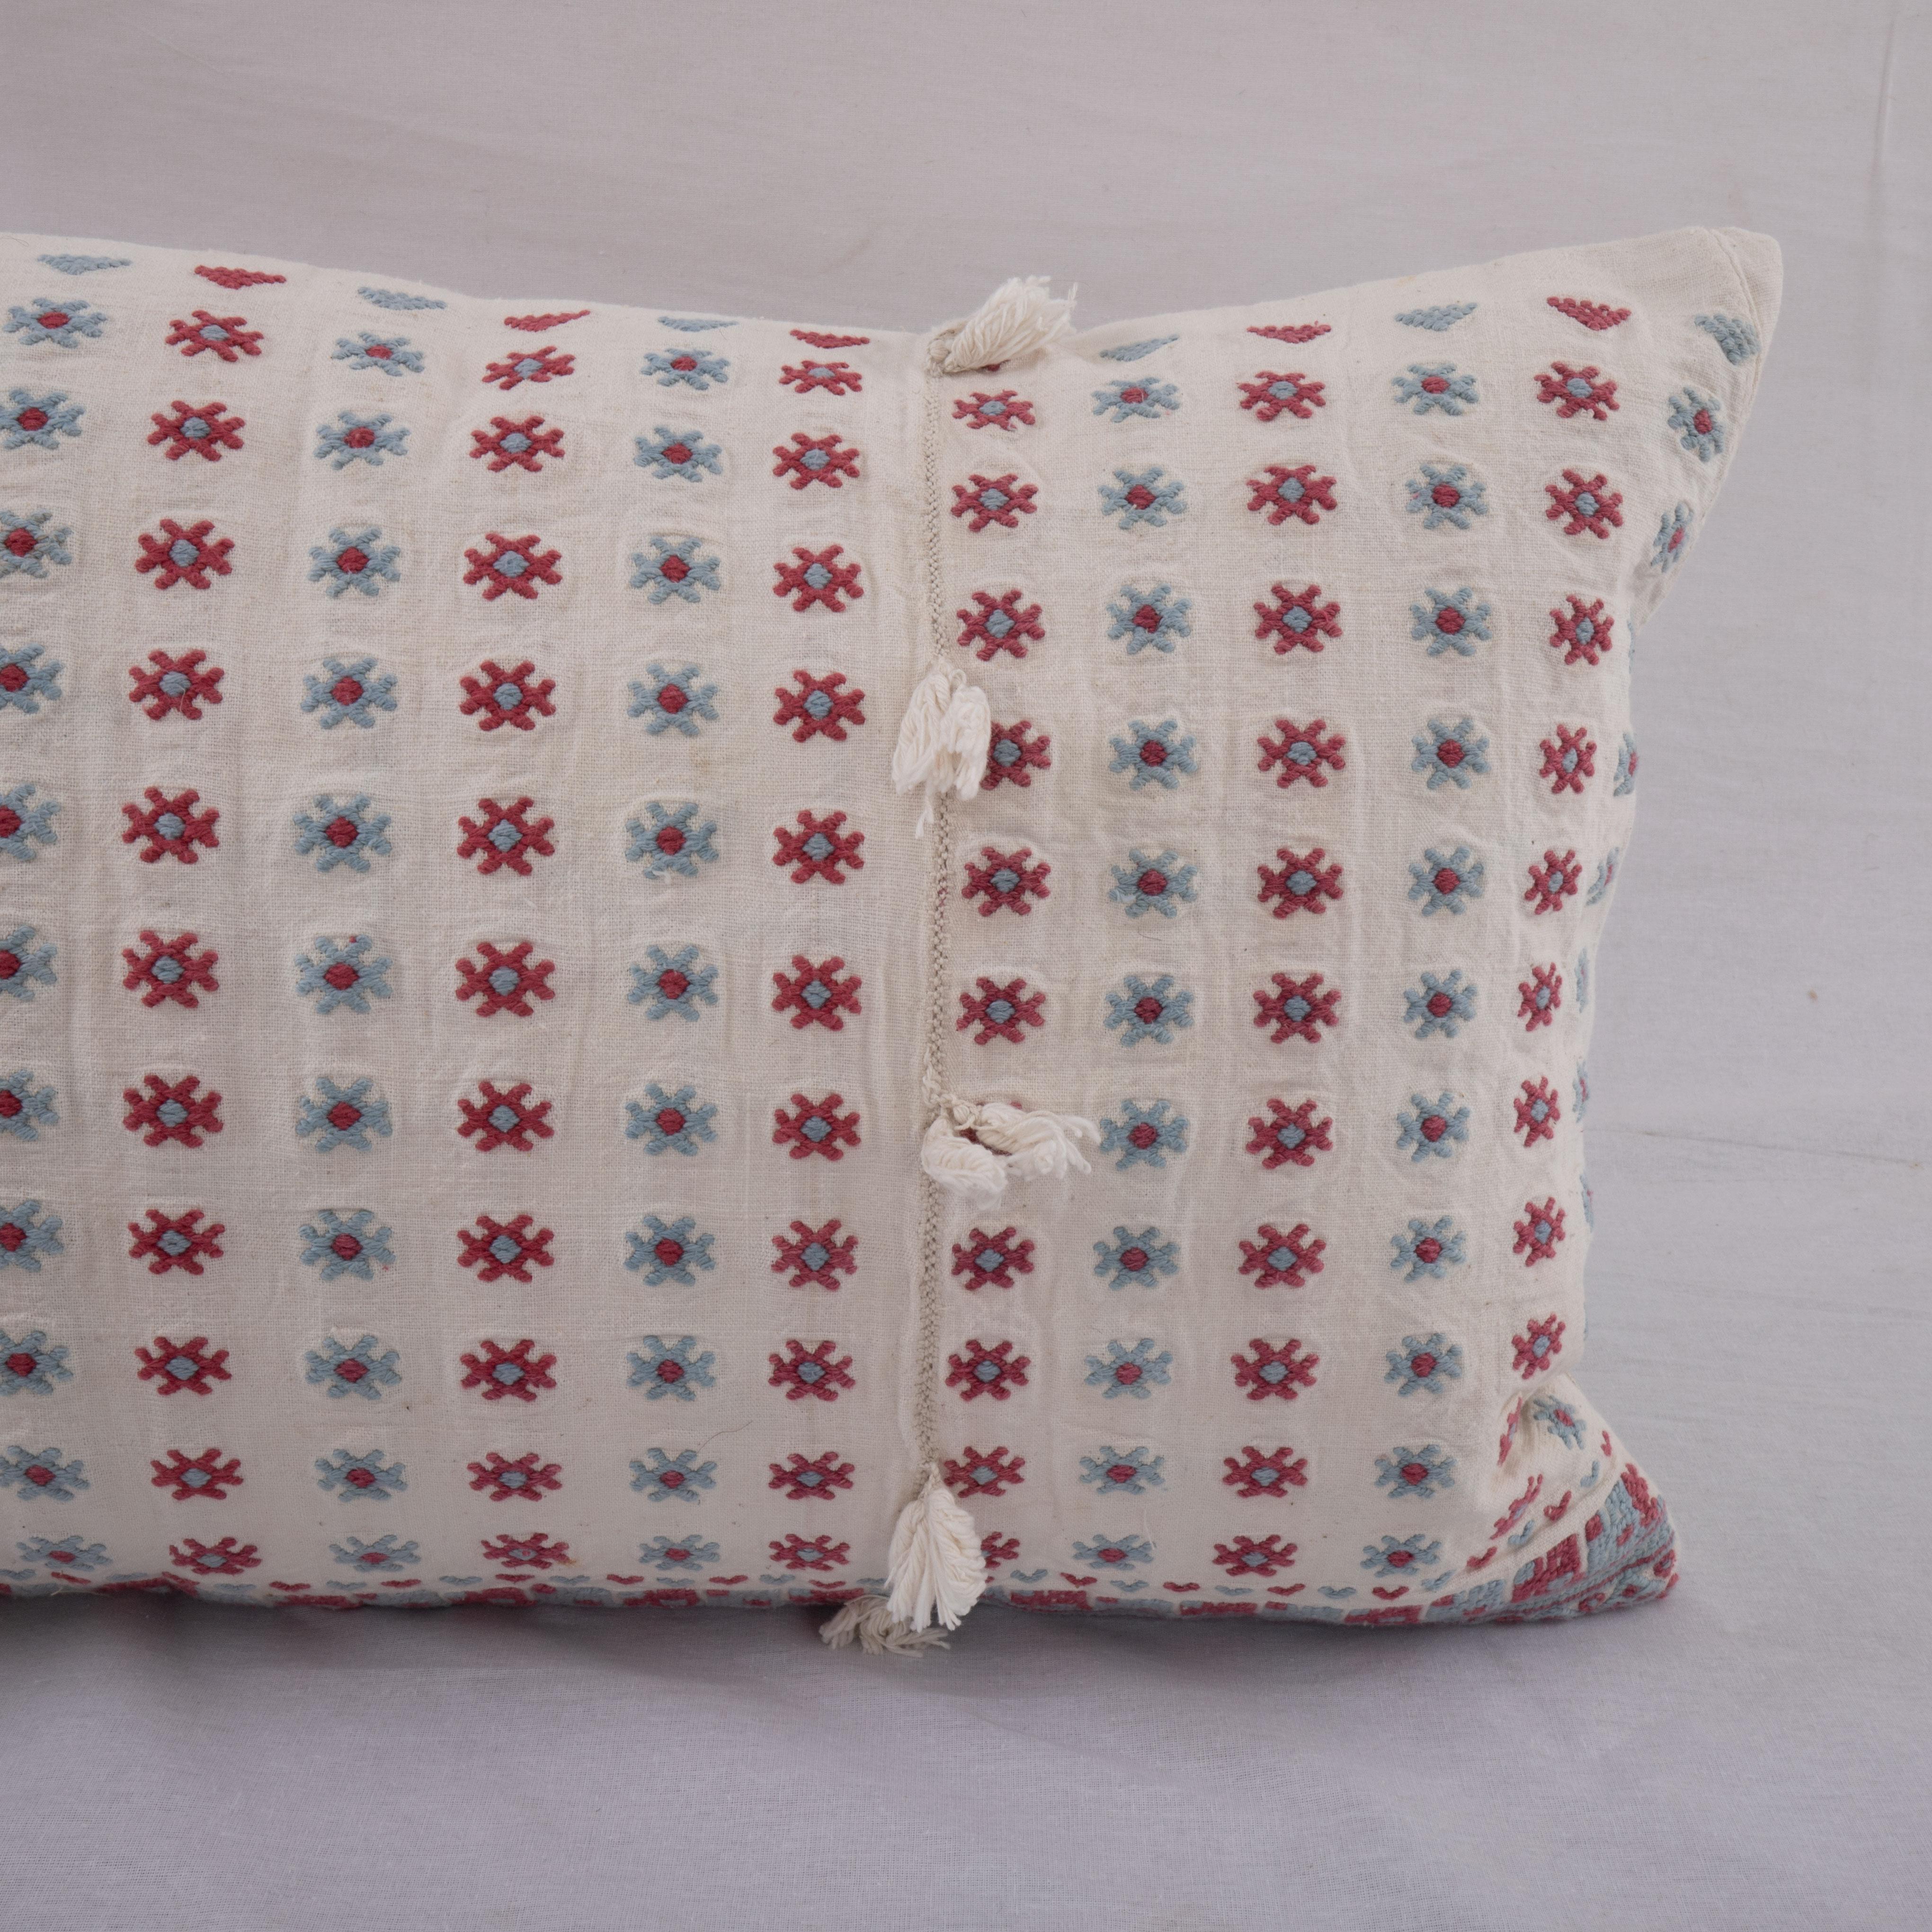 Turkish Pillow Cover Made from an Anatolian Embroidered Skirt, 2nd Quarter 20th C. For Sale